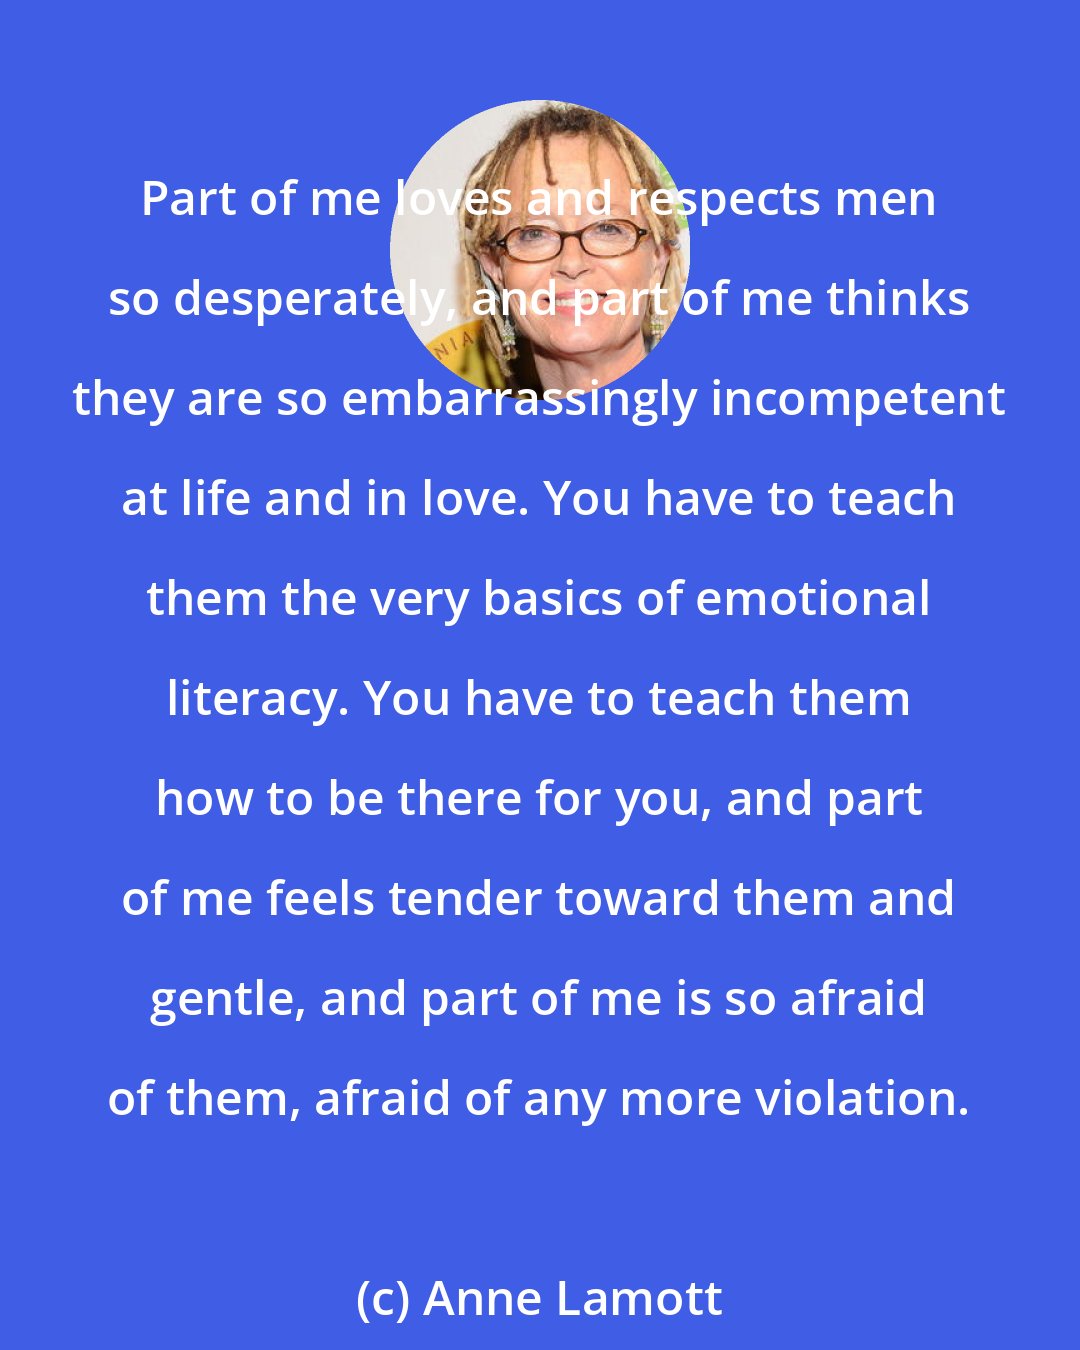 Anne Lamott: Part of me loves and respects men so desperately, and part of me thinks they are so embarrassingly incompetent at life and in love. You have to teach them the very basics of emotional literacy. You have to teach them how to be there for you, and part of me feels tender toward them and gentle, and part of me is so afraid of them, afraid of any more violation.